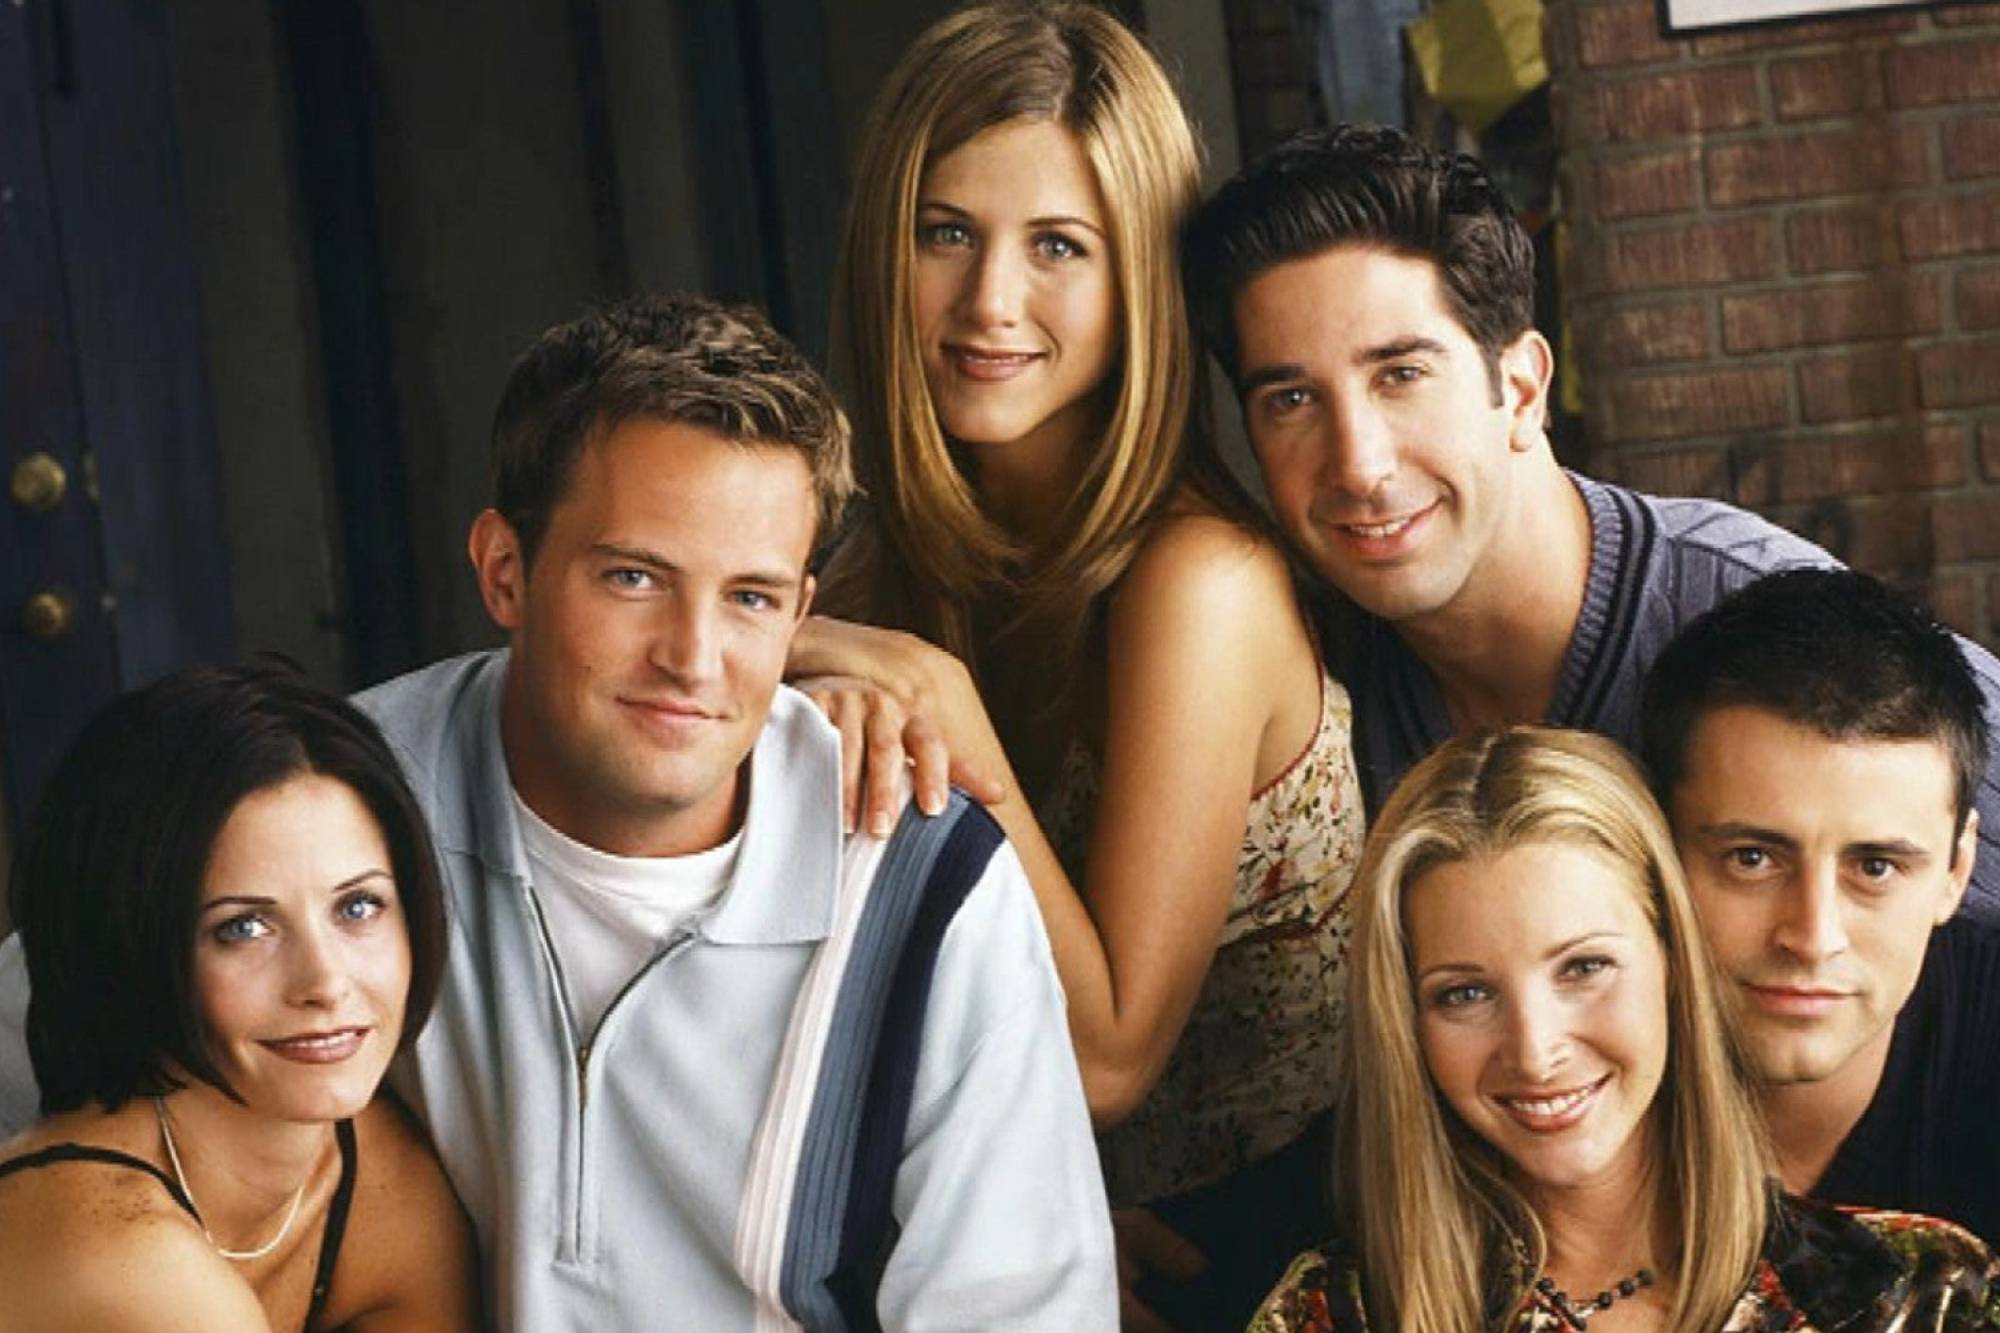 Who's going to host the 'Friends' reunion now that Ellen's out? Film